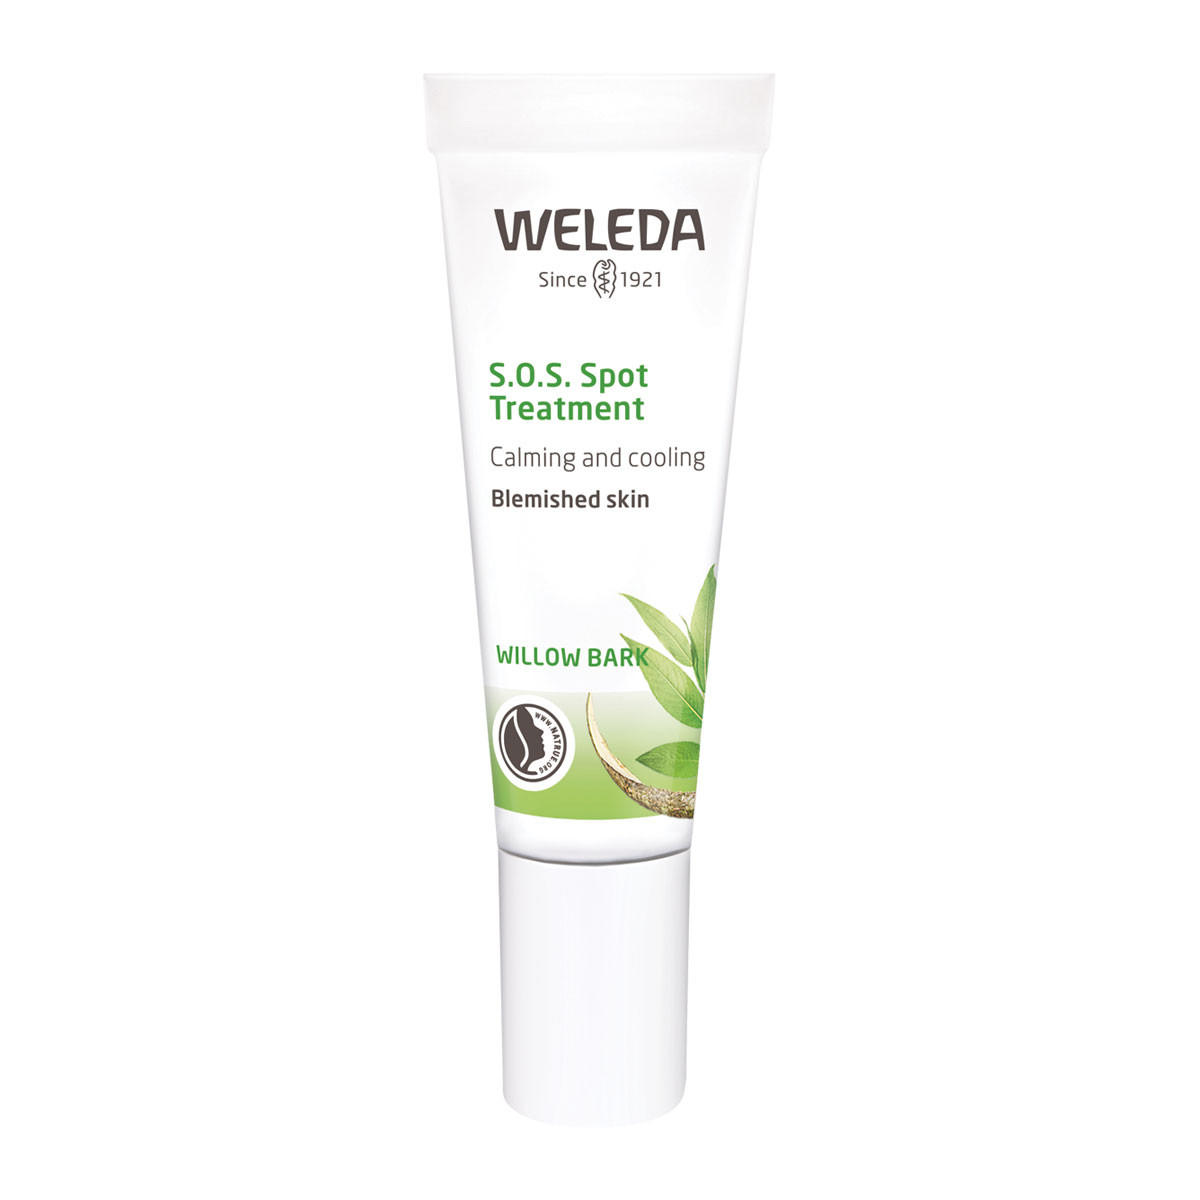 Buy　Treatment　Spot　Blemished　Skin　by　HealthPost　Weleda　I　NZ